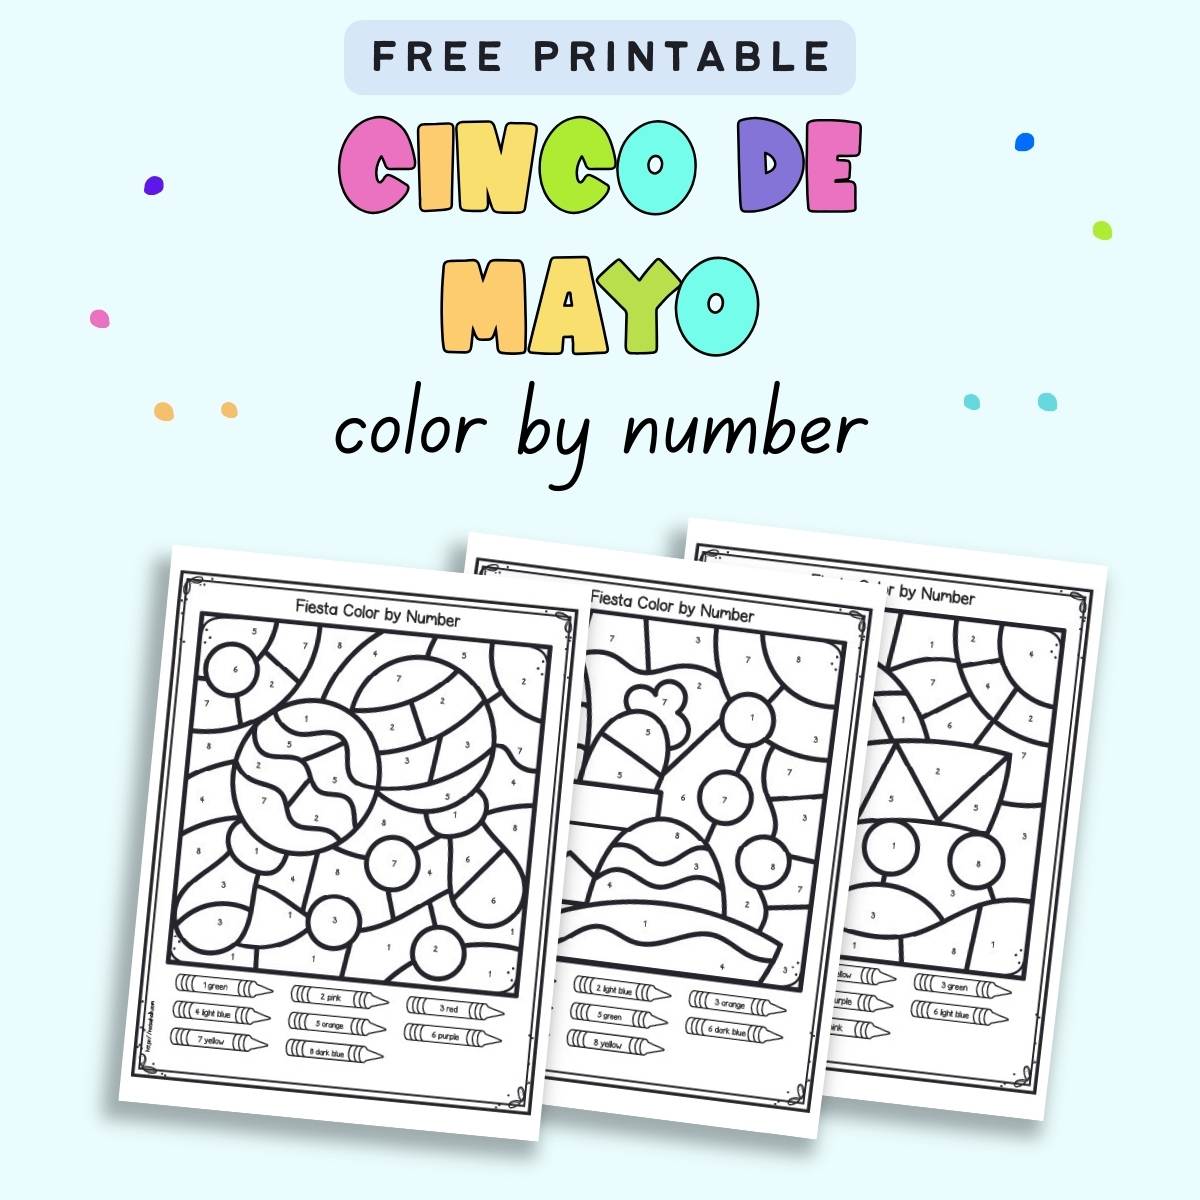 Text "Free printable Cinco de Mayo color by number" with a  preview of three color by number pages for kindergarteners 